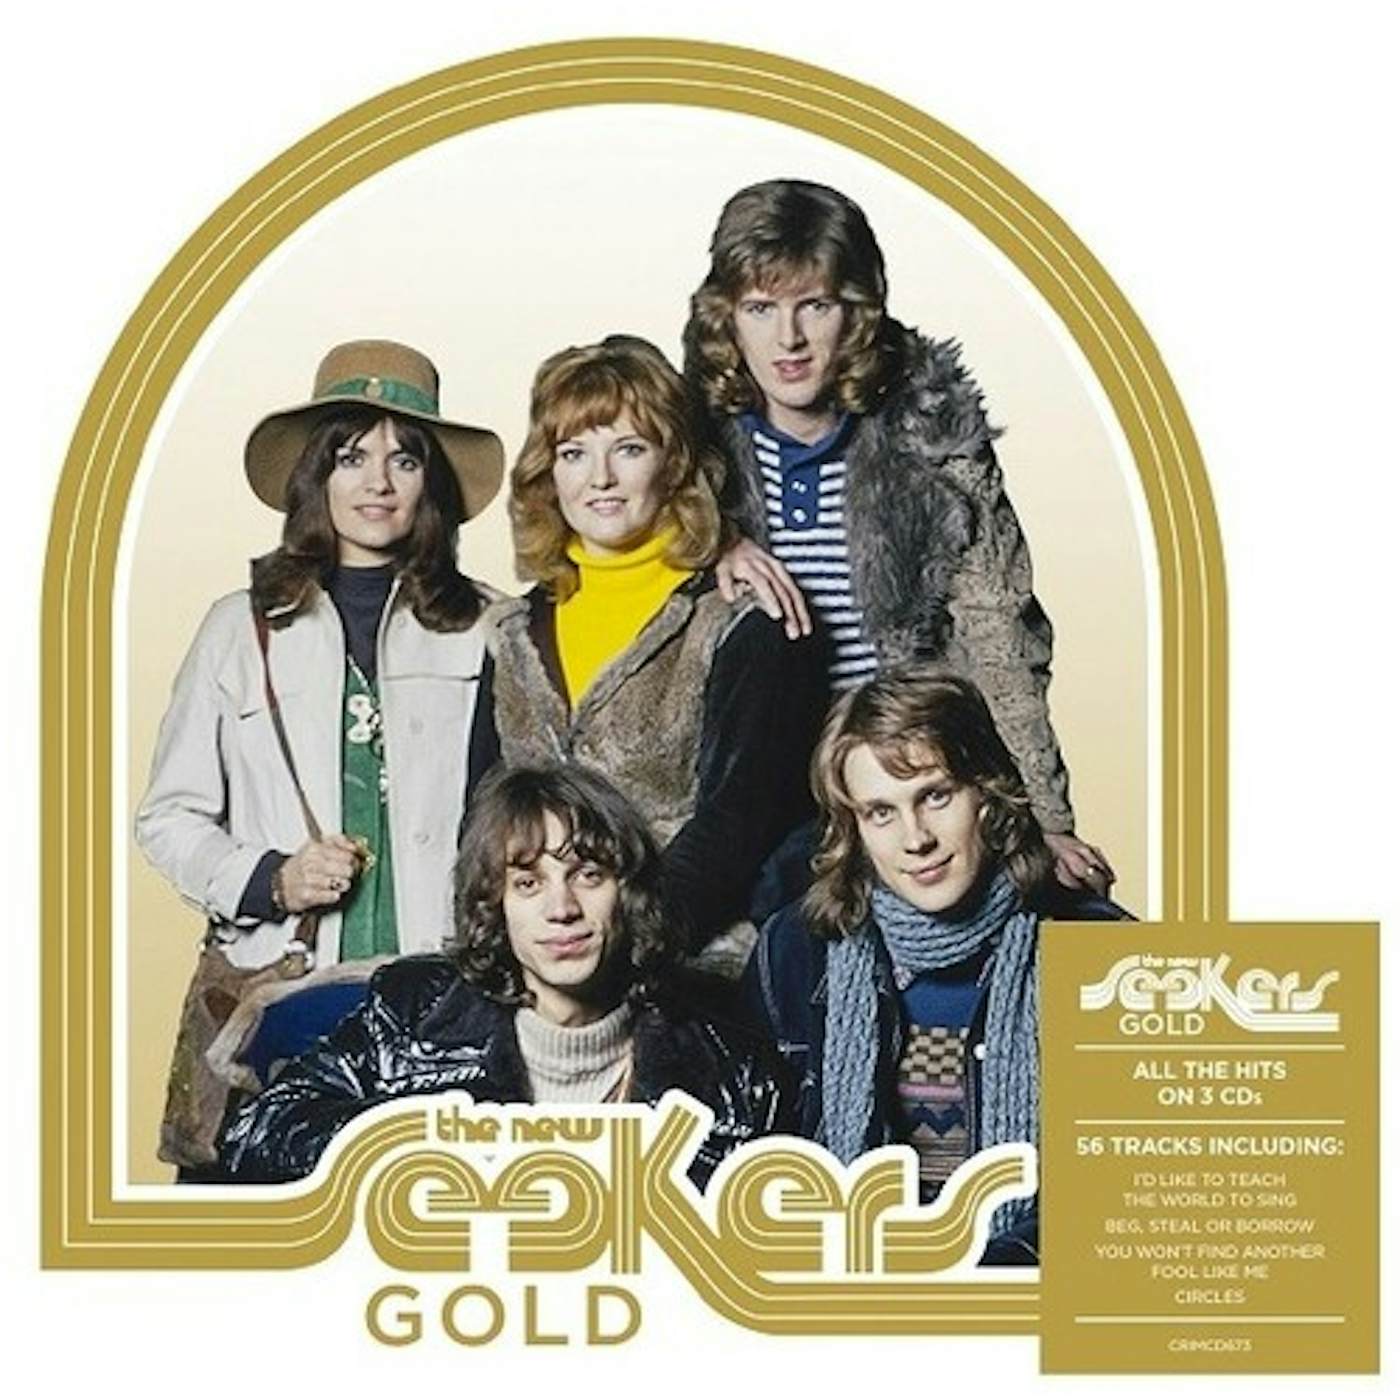 The New Seekers GOLD CD